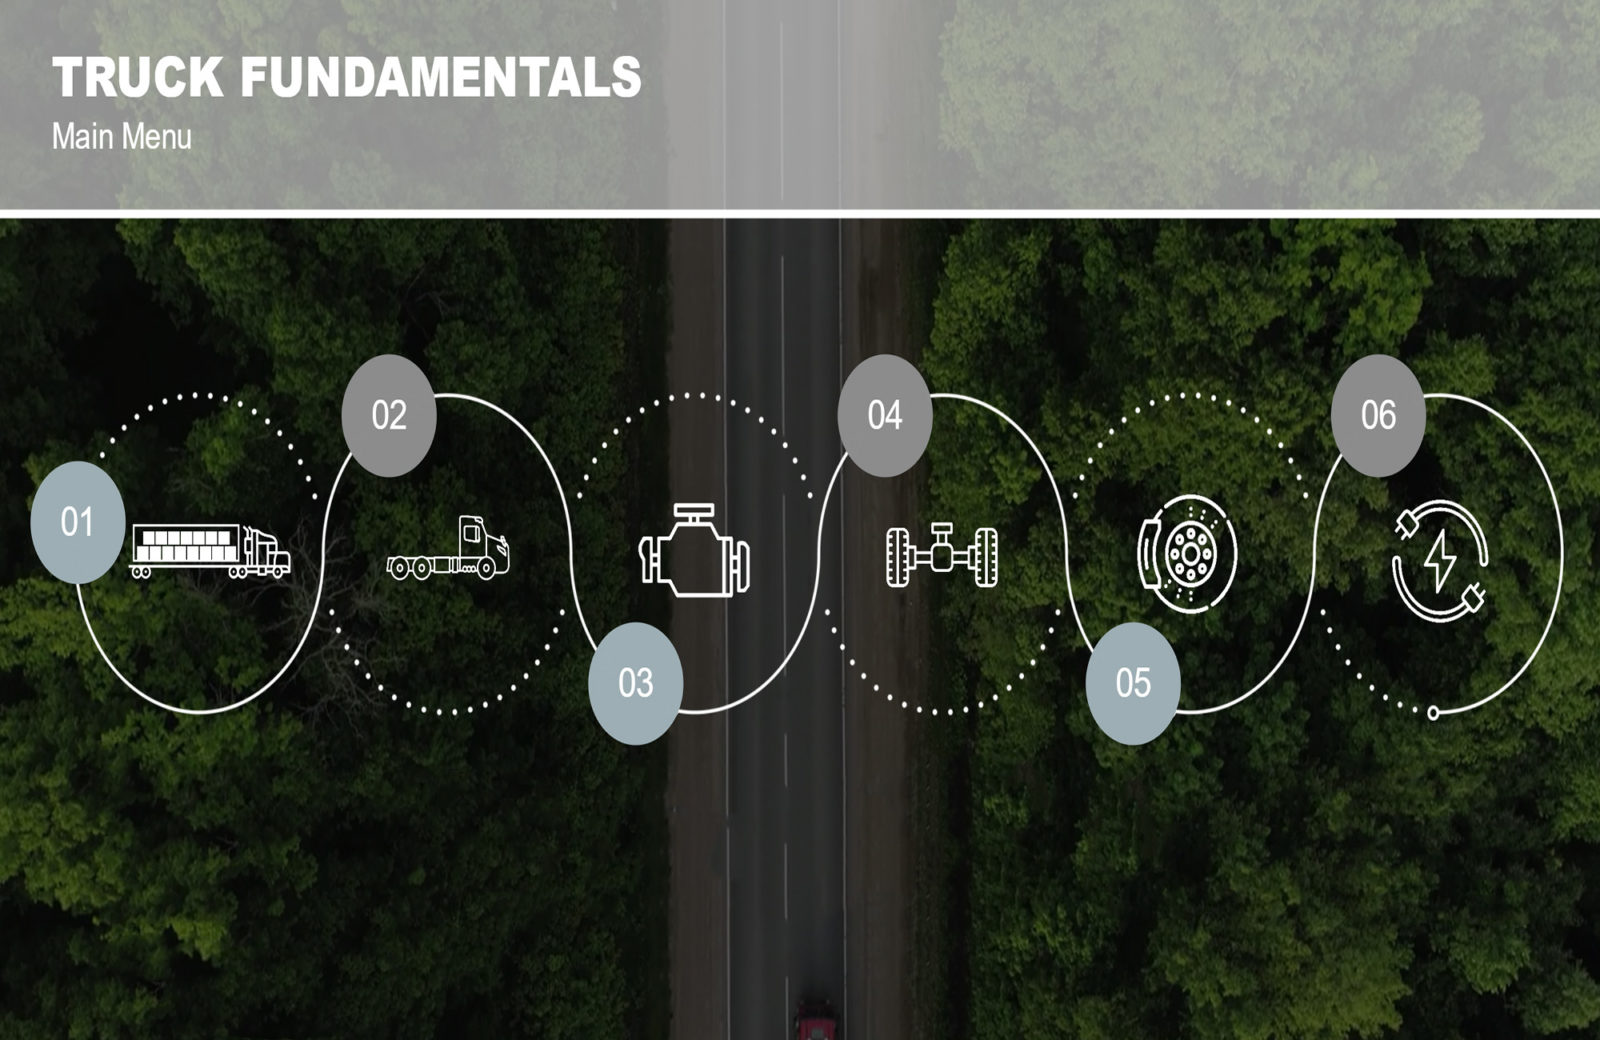 Truck Fundamentals eLearning Now Available